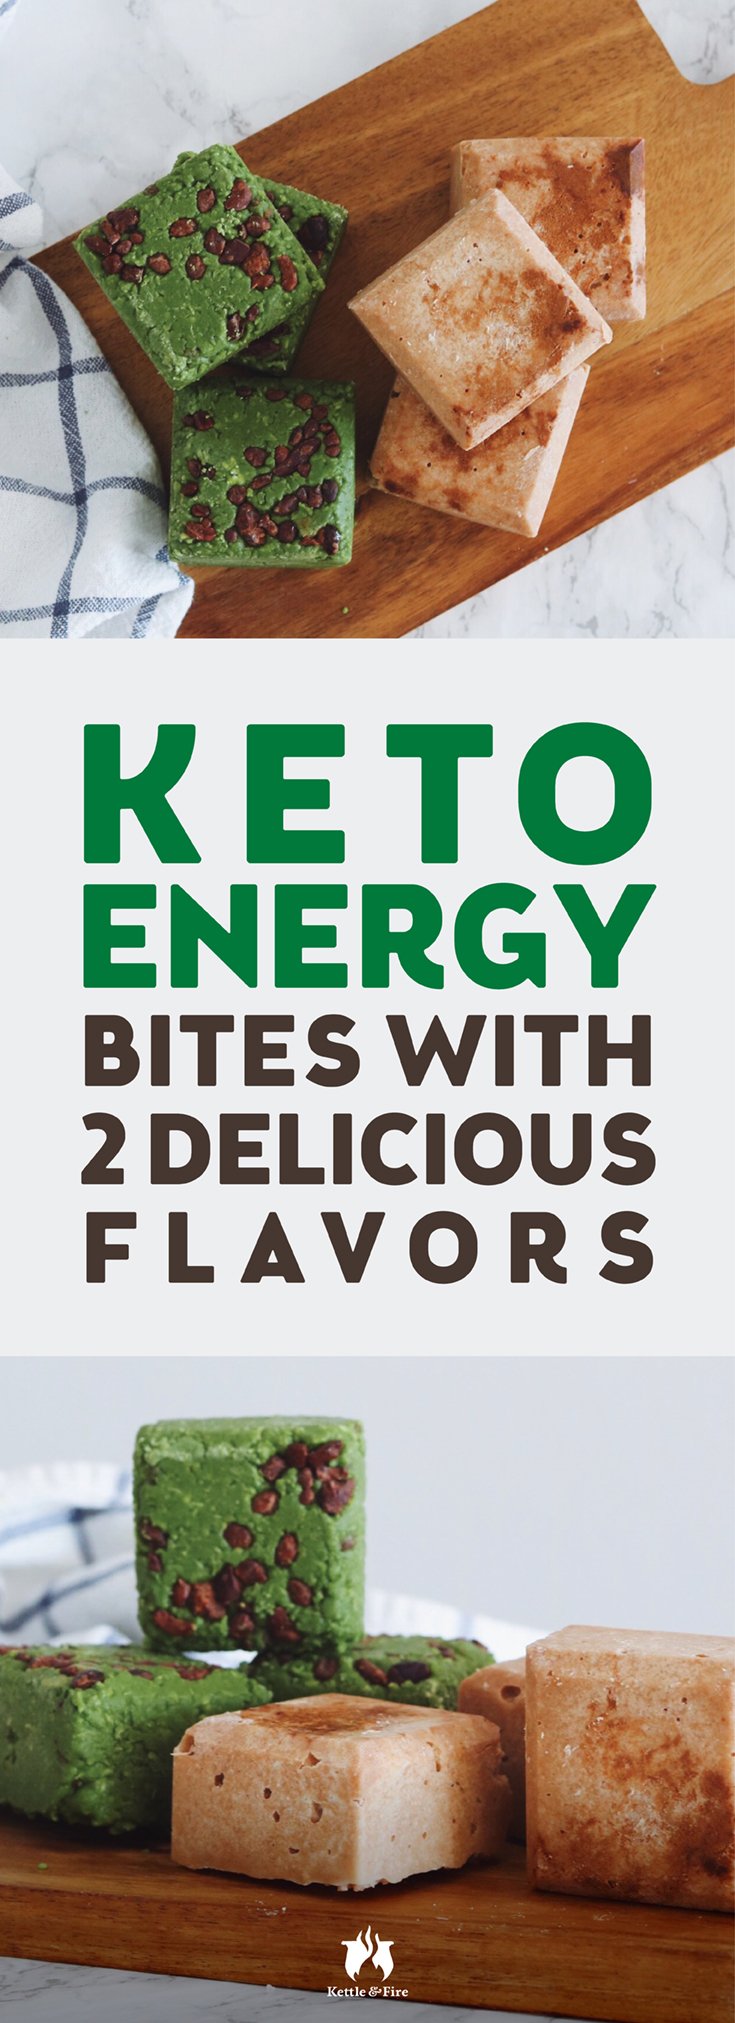 With two delicious flavors, these keto energy bites are the perfect grab ‘n’ go snack to ensure you always have a keto-friendly option on hand!